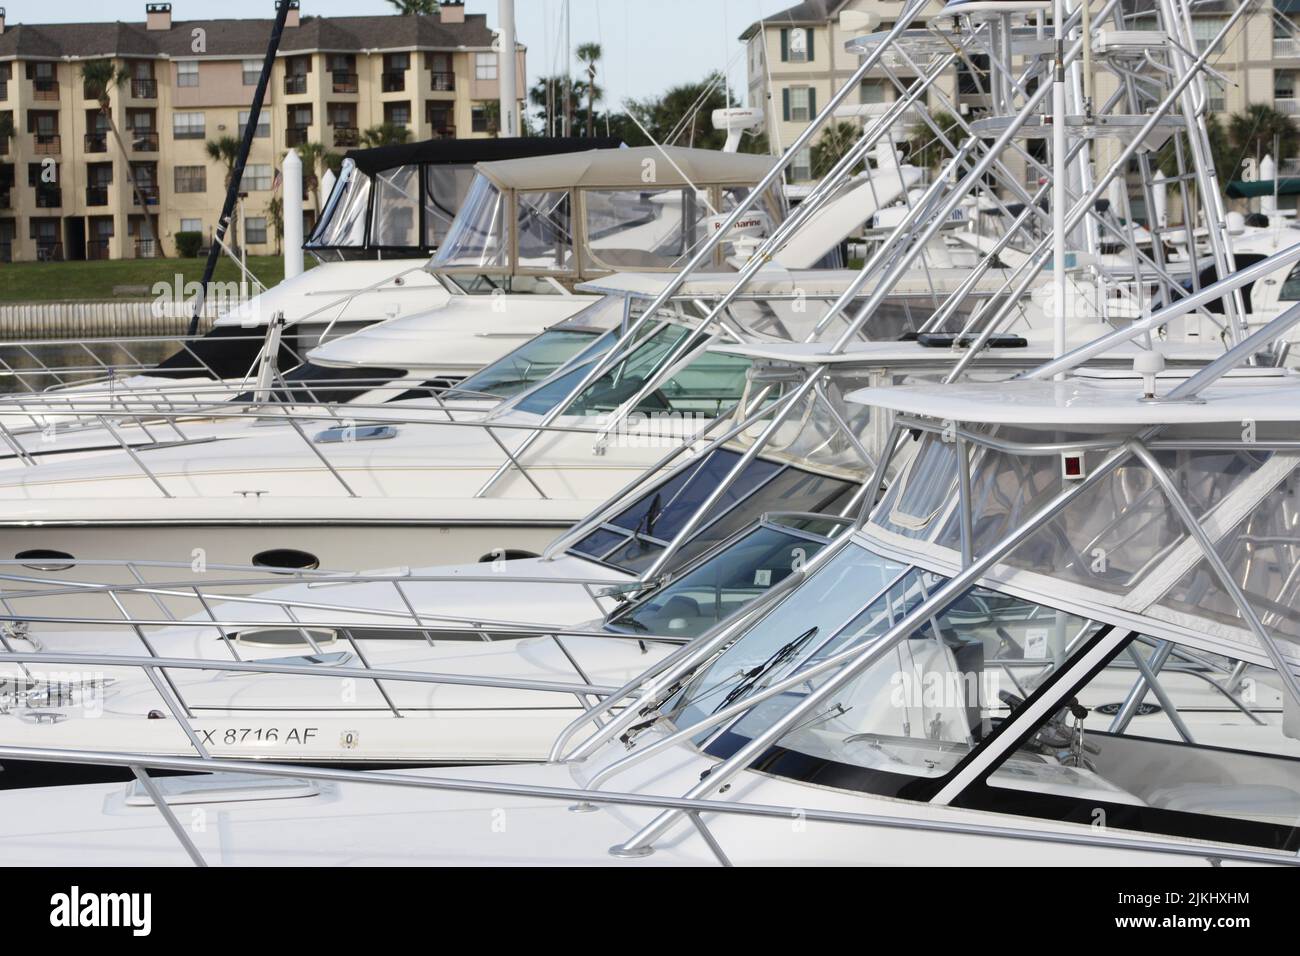 A Close up side shot of a row of docked boats and yachts Stock Photo